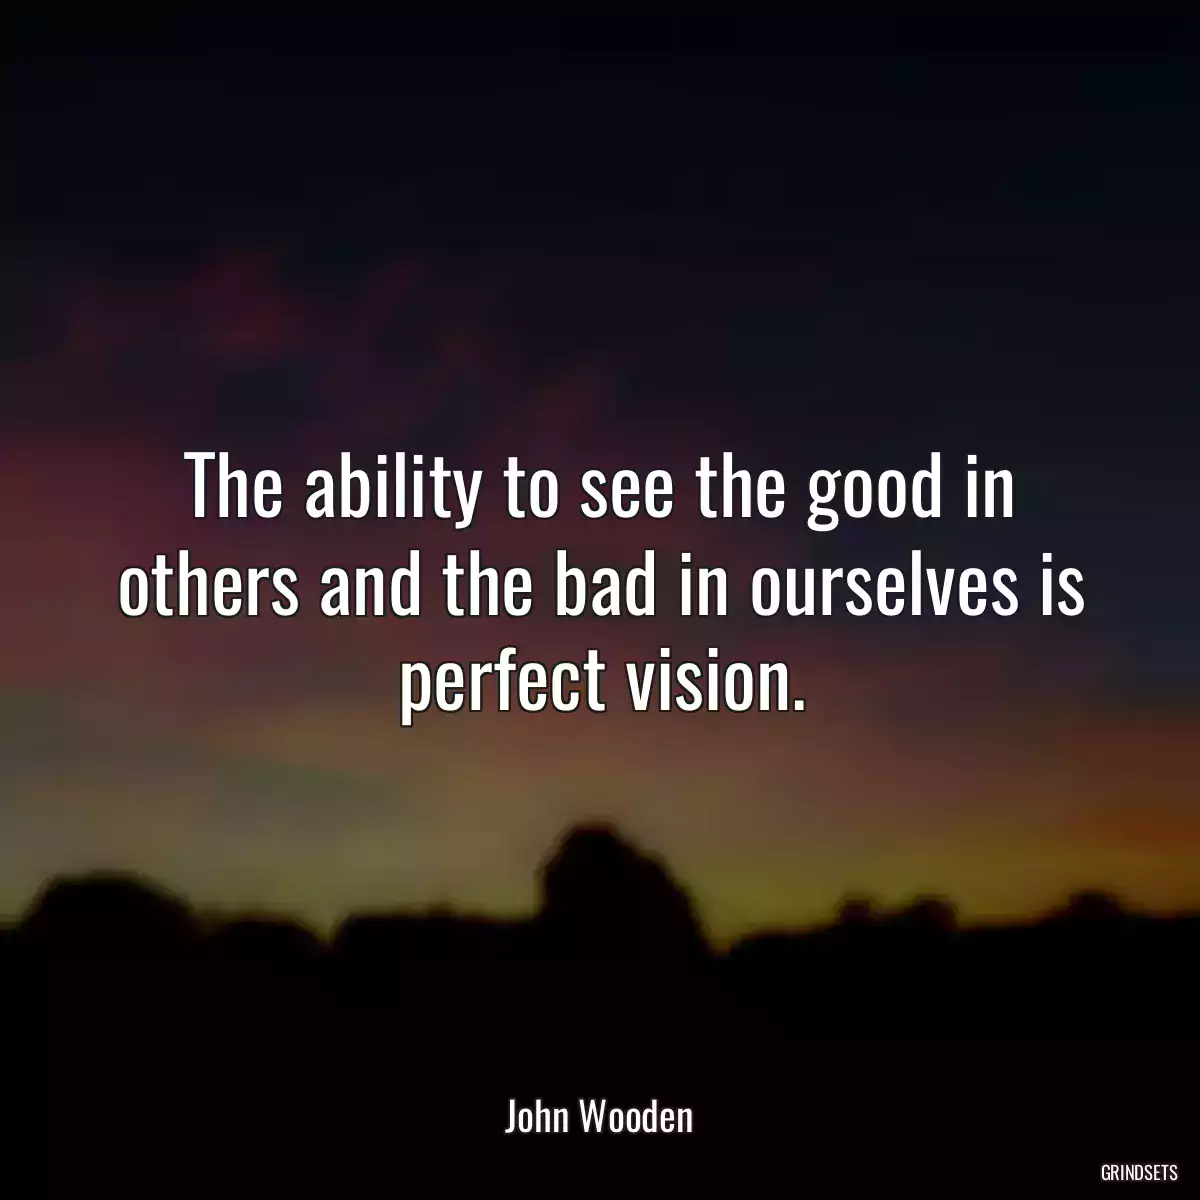 The ability to see the good in others and the bad in ourselves is perfect vision.